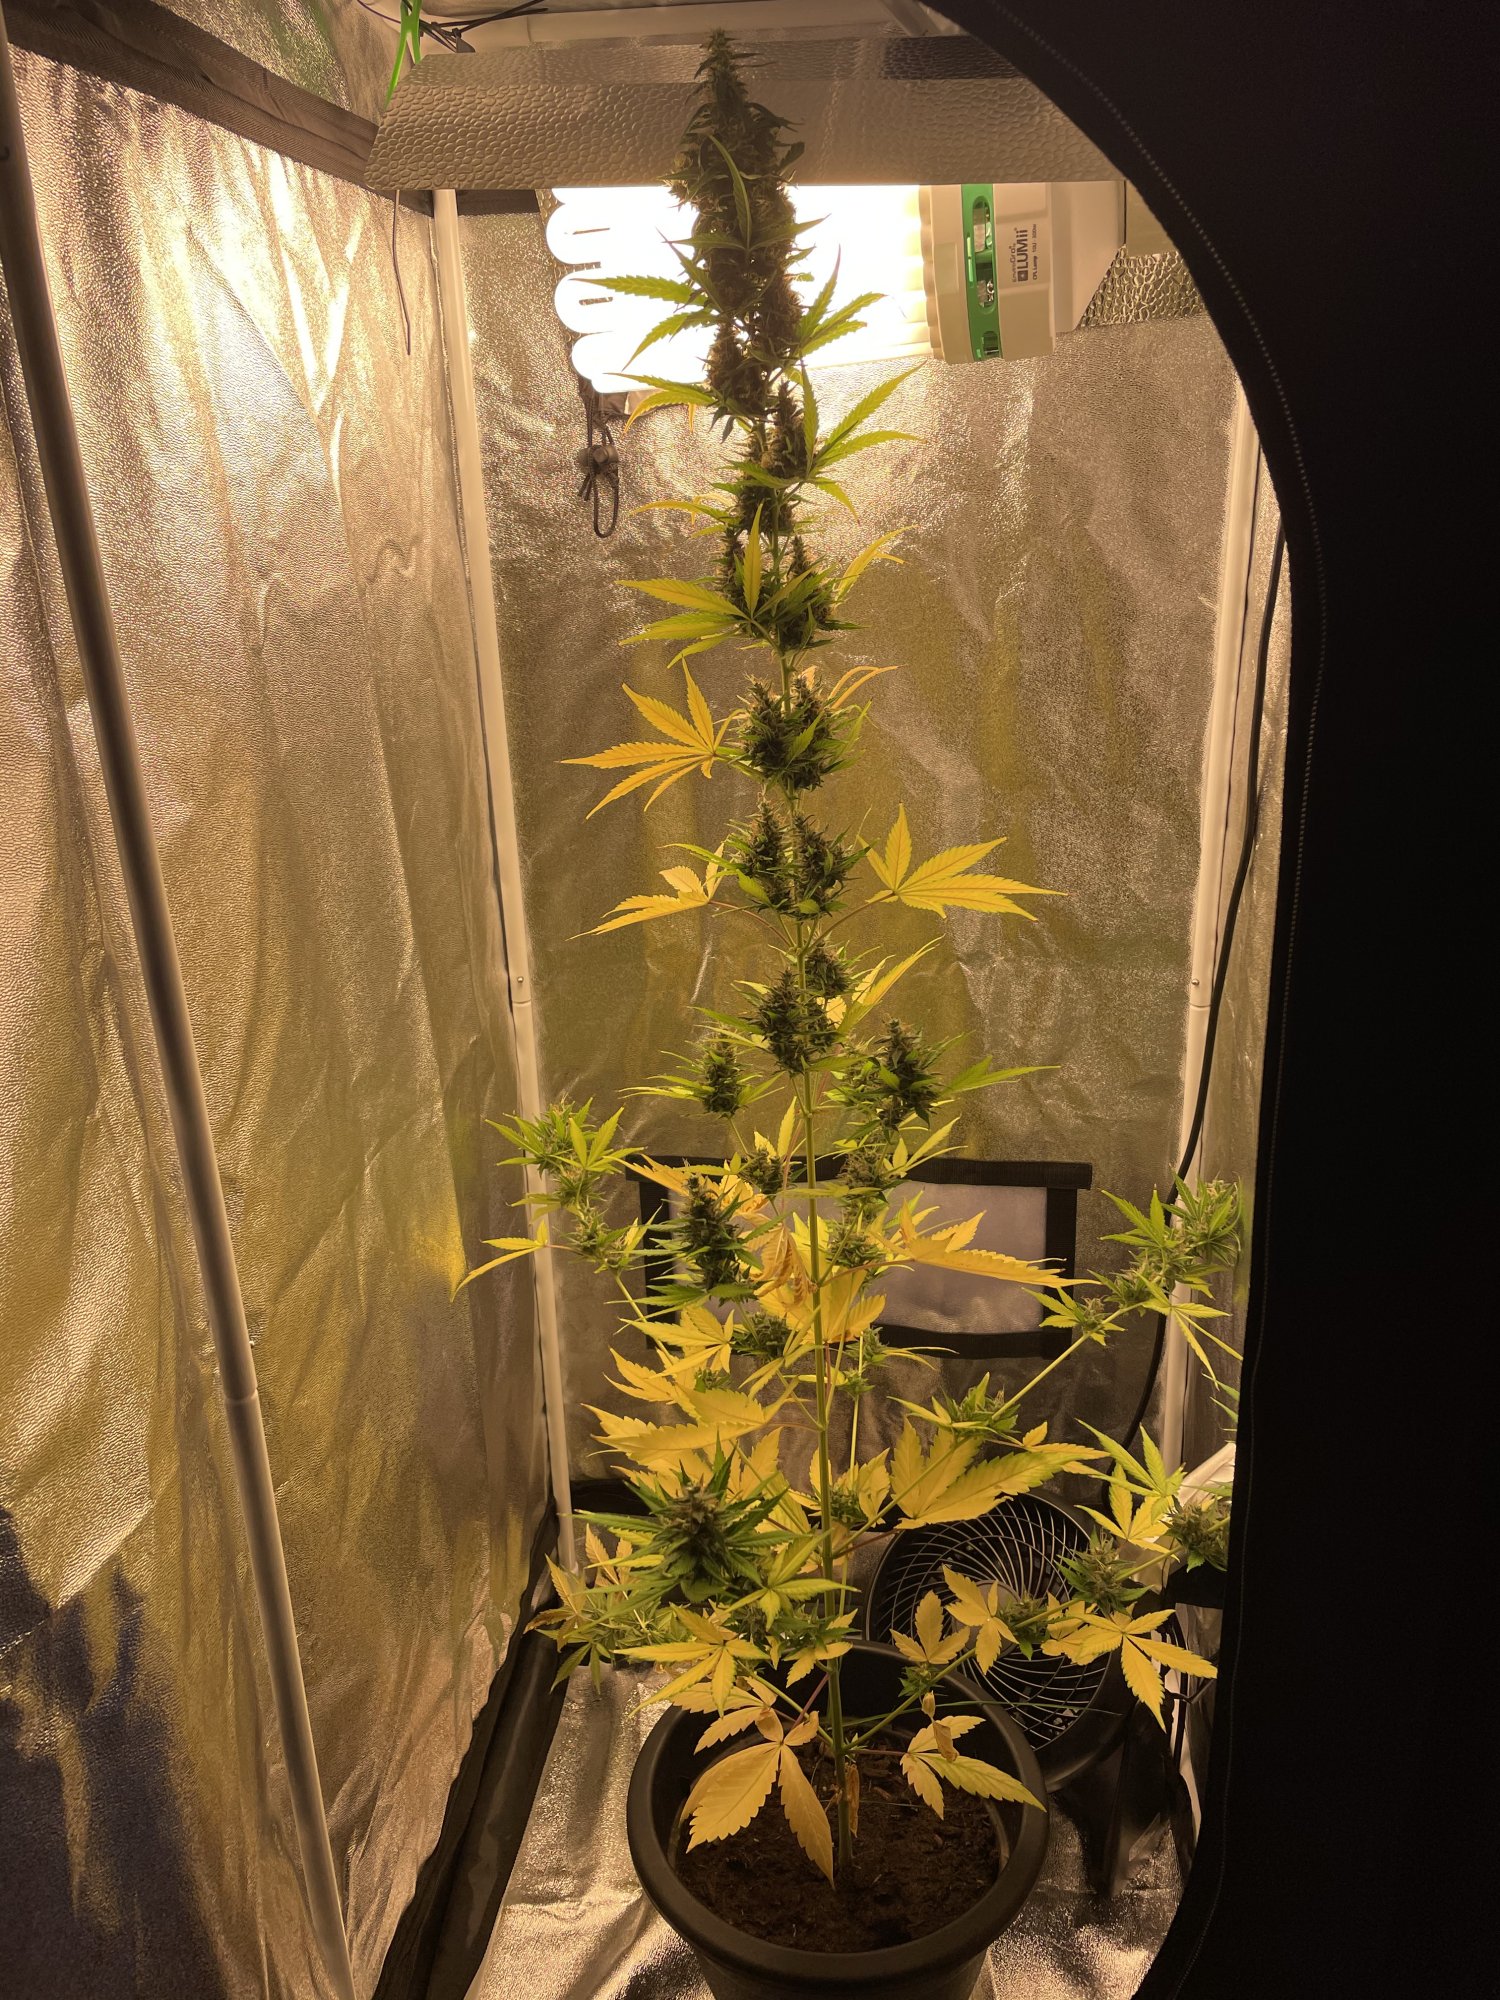 After some expertise   my auto flowering blue treacle is nearing harvest 2